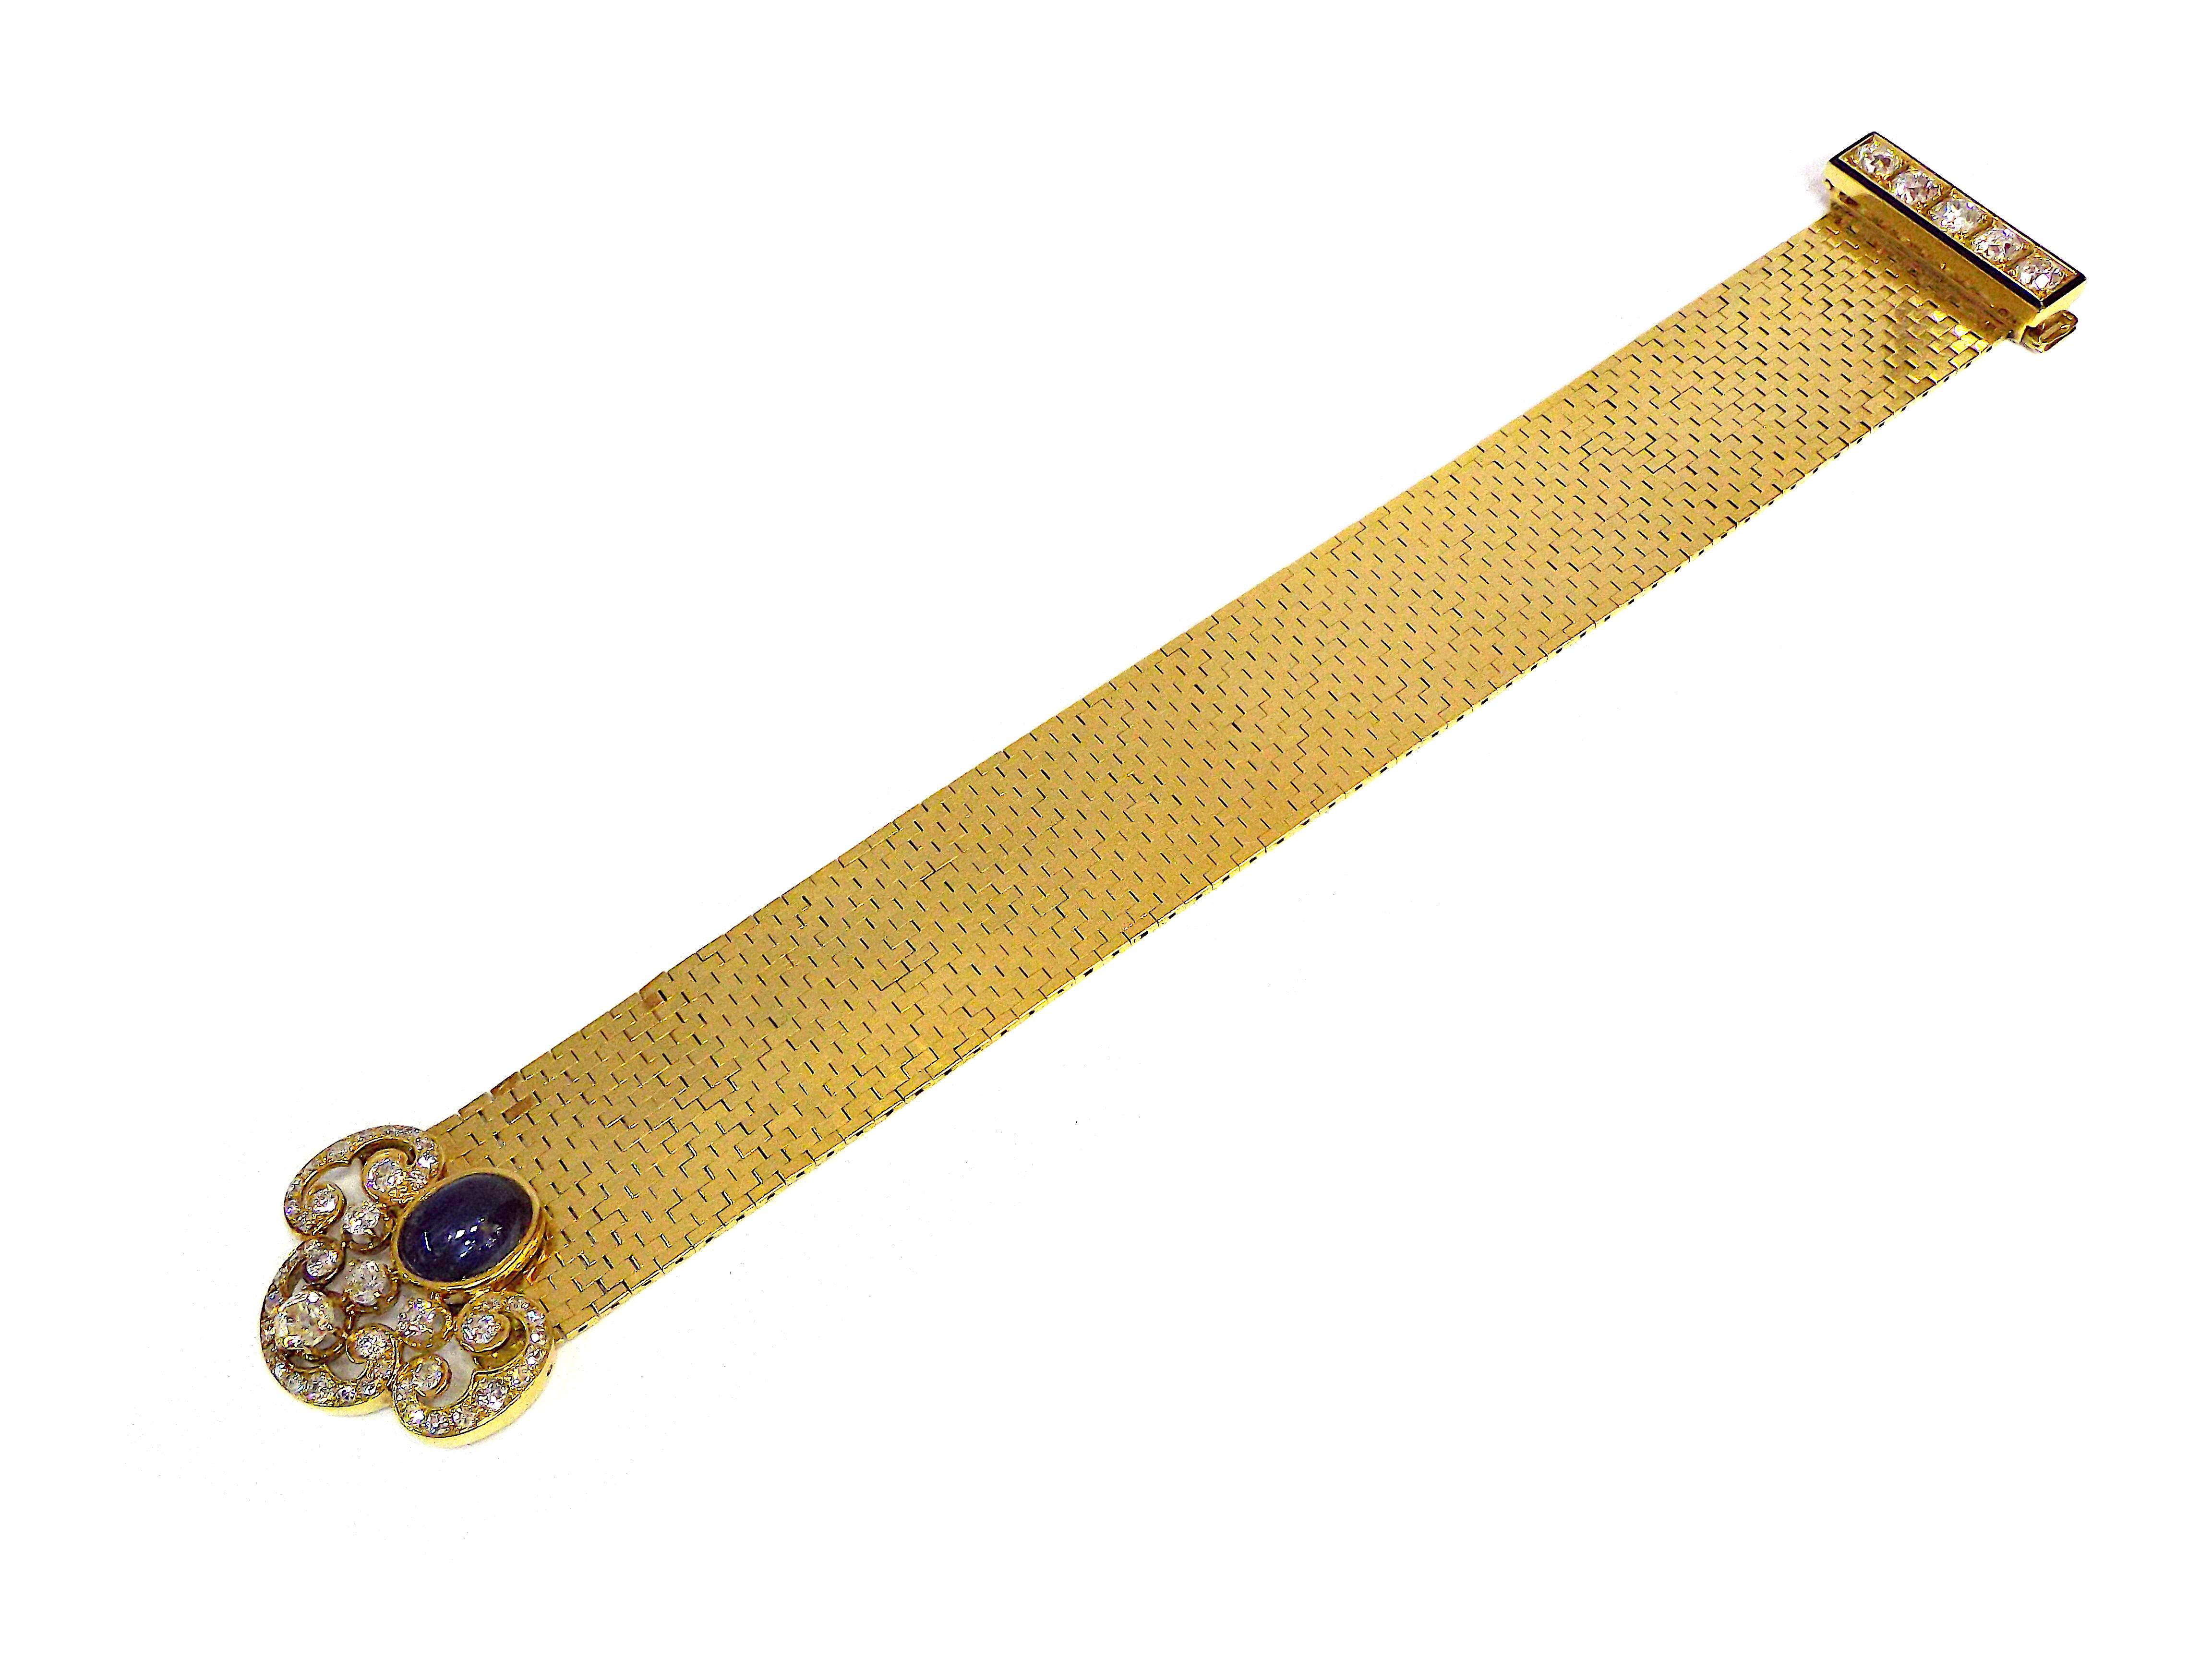 A fabulous wide bracelet by Van Cleef and Arpels from Ludo collection. Featuring mine, European, and single-cut diamonds weighing a total of approximately 4.15 carats; sapphire cabochon, enamel, 18k gold. Marked Van Cleef & Arpels, French hallmarks,